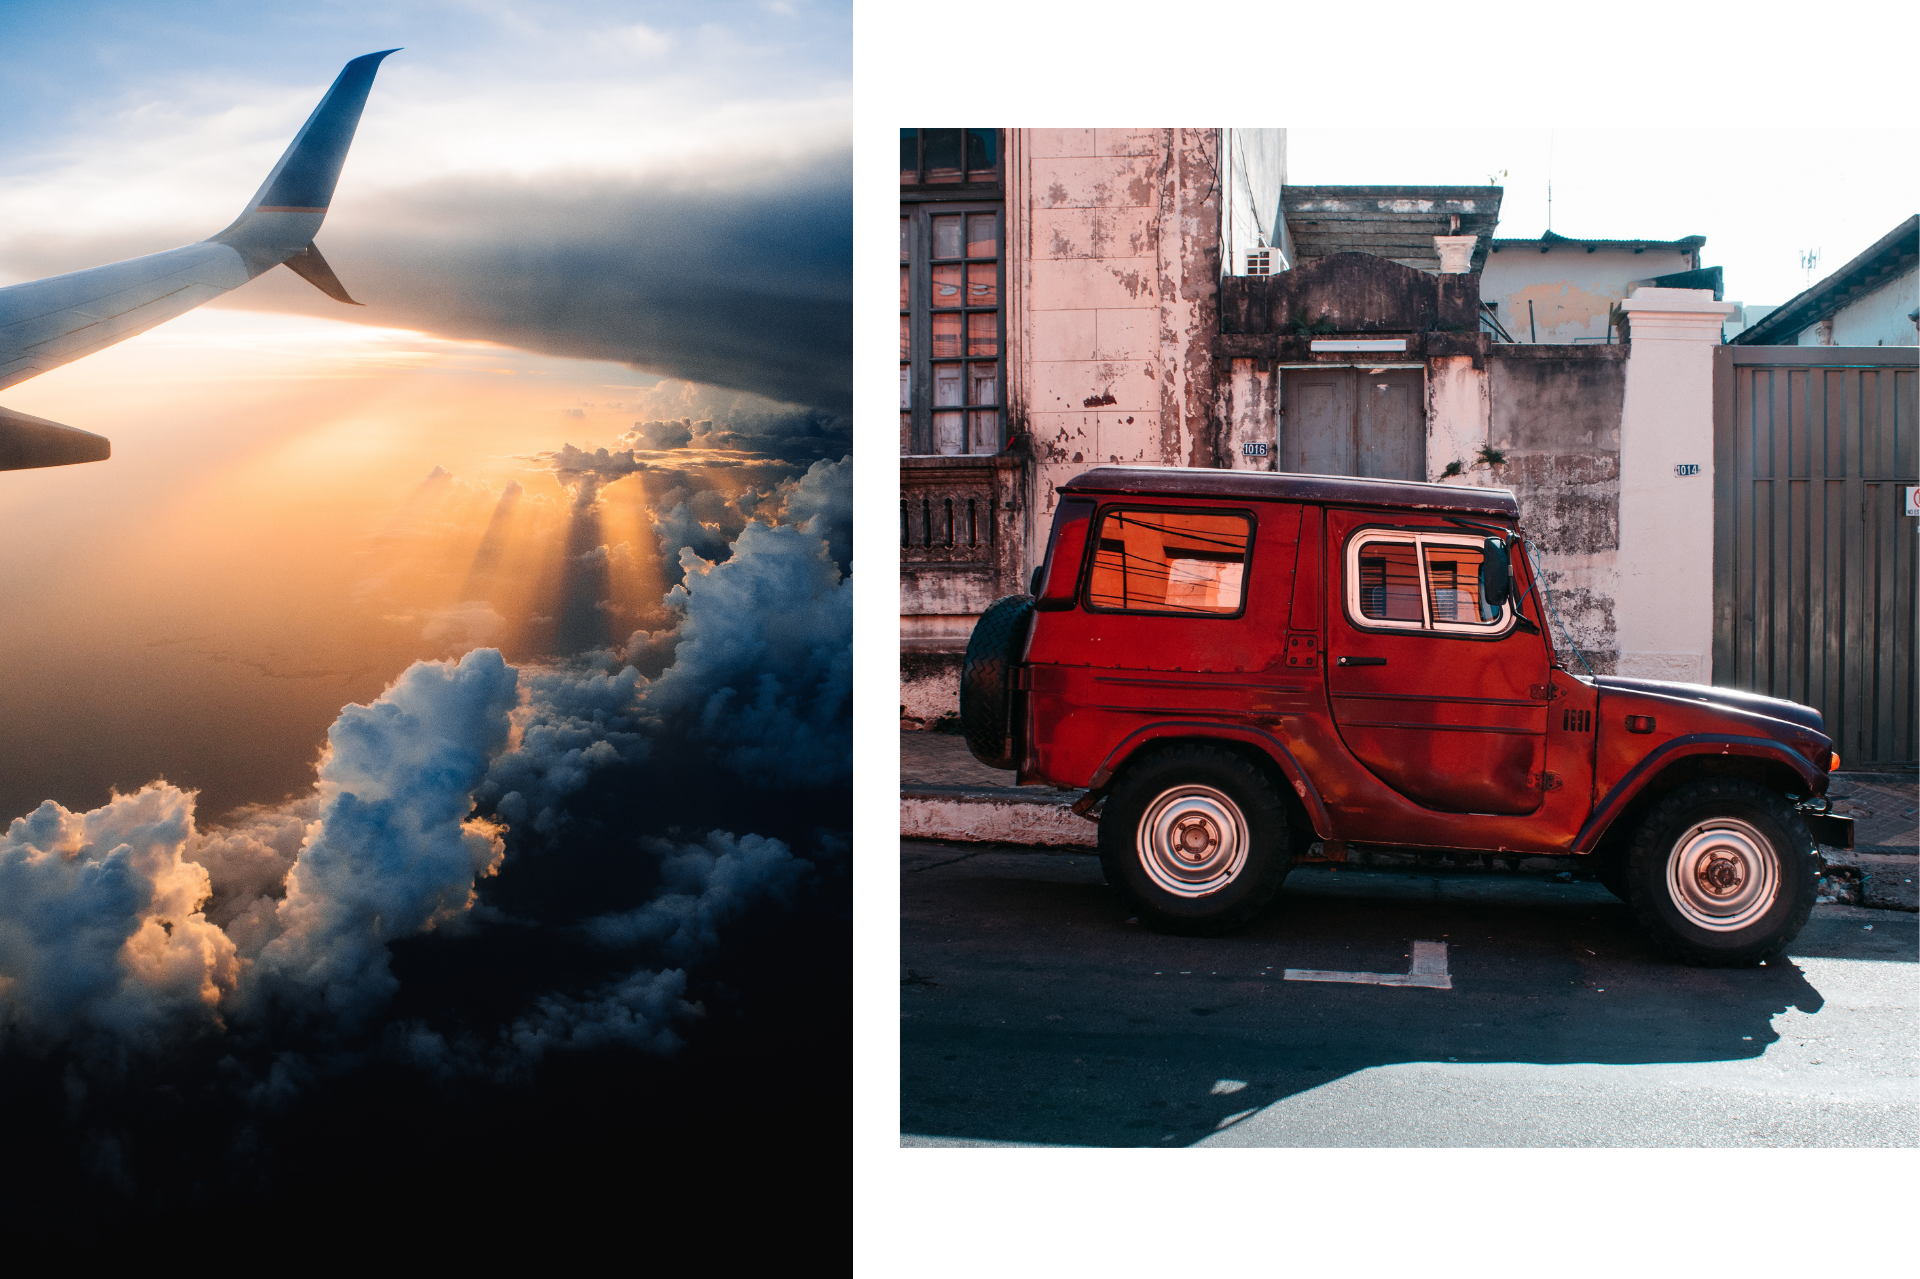 Airplane and jeep 